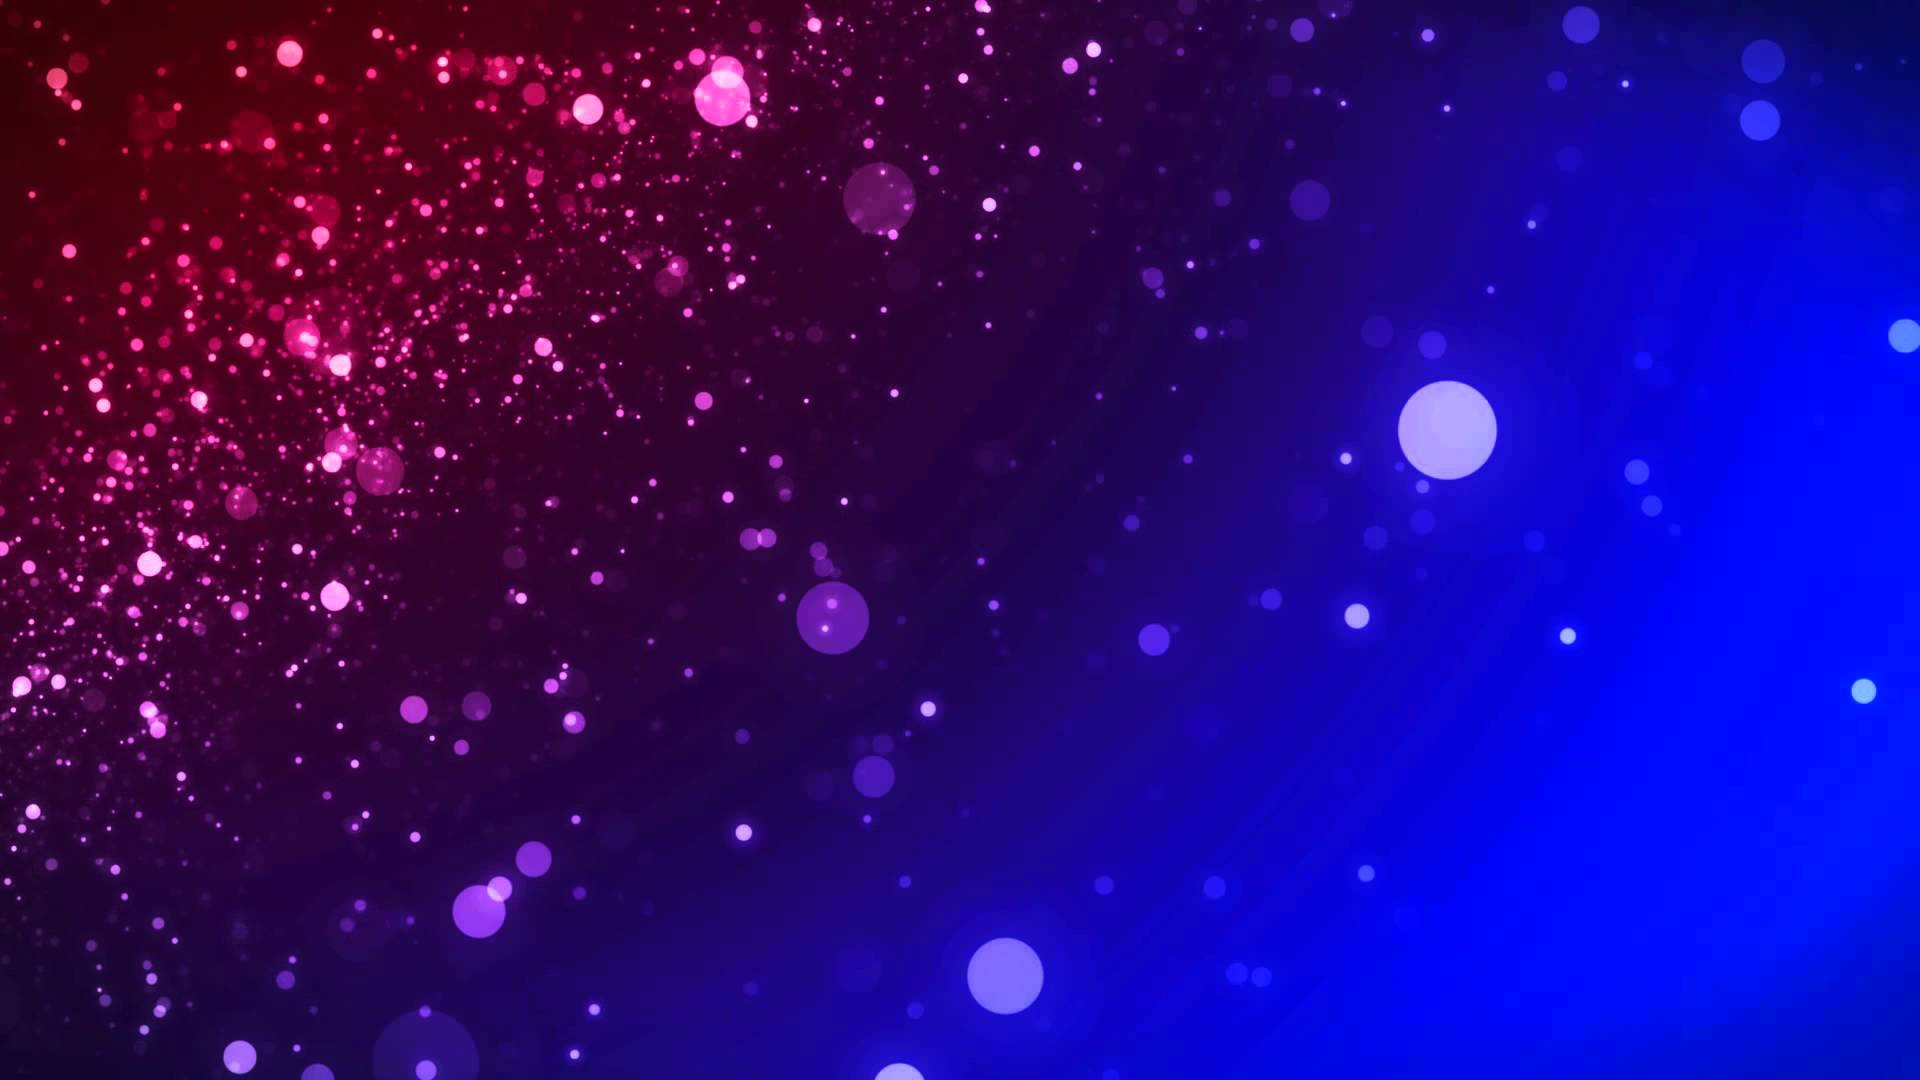 Free download FREE Motion Background Download now Free Glory [1920x1080]  for your Desktop, Mobile & Tablet | Explore 76+ Motion Wallpaper | Motion  Desktop Wallpaper, Free Motion Desktop Backgrounds, Slow Motion Wallpaper